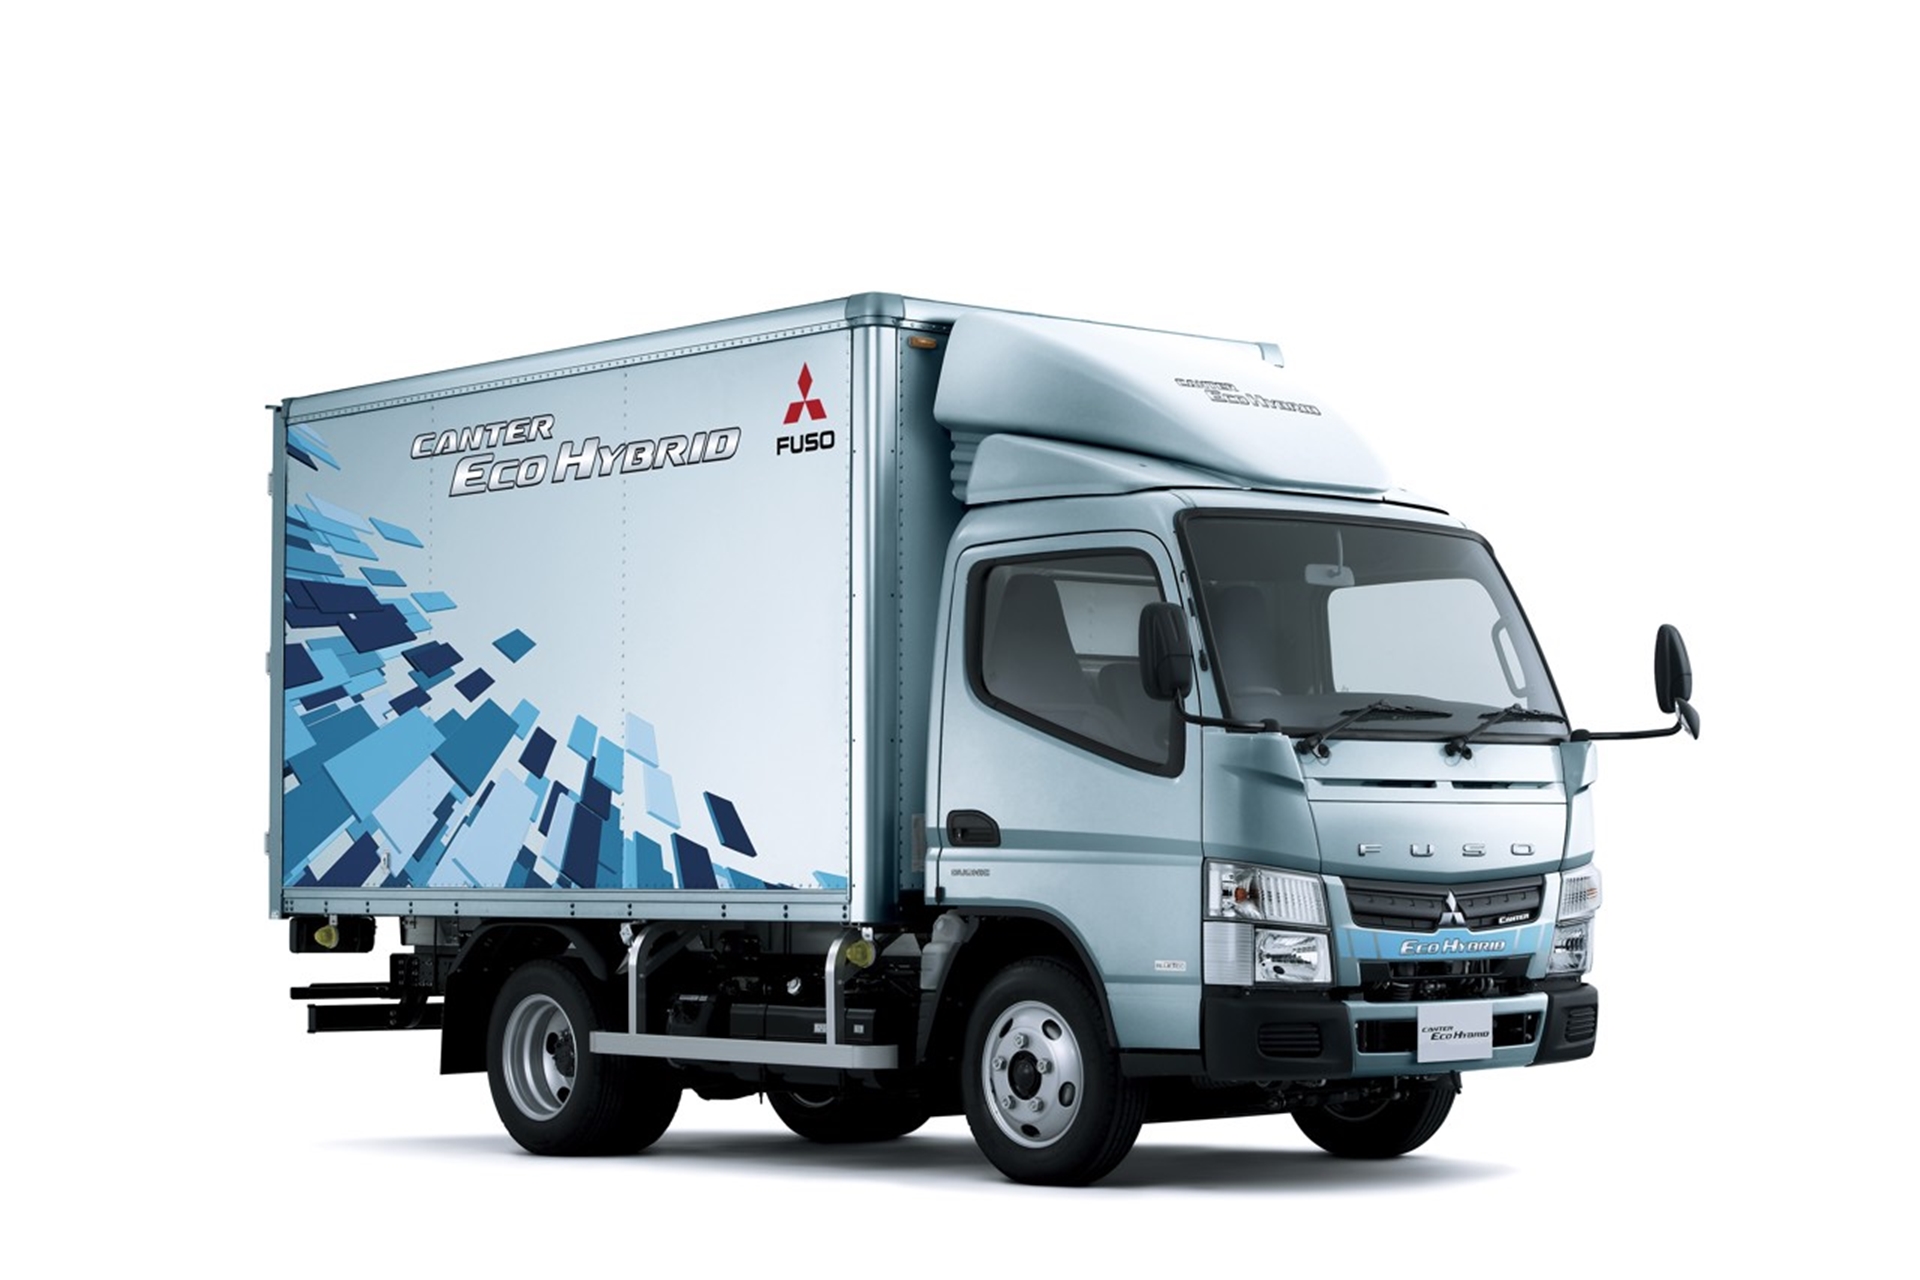 New Fuso Canter Eco Hybrid: Green light for efficiency